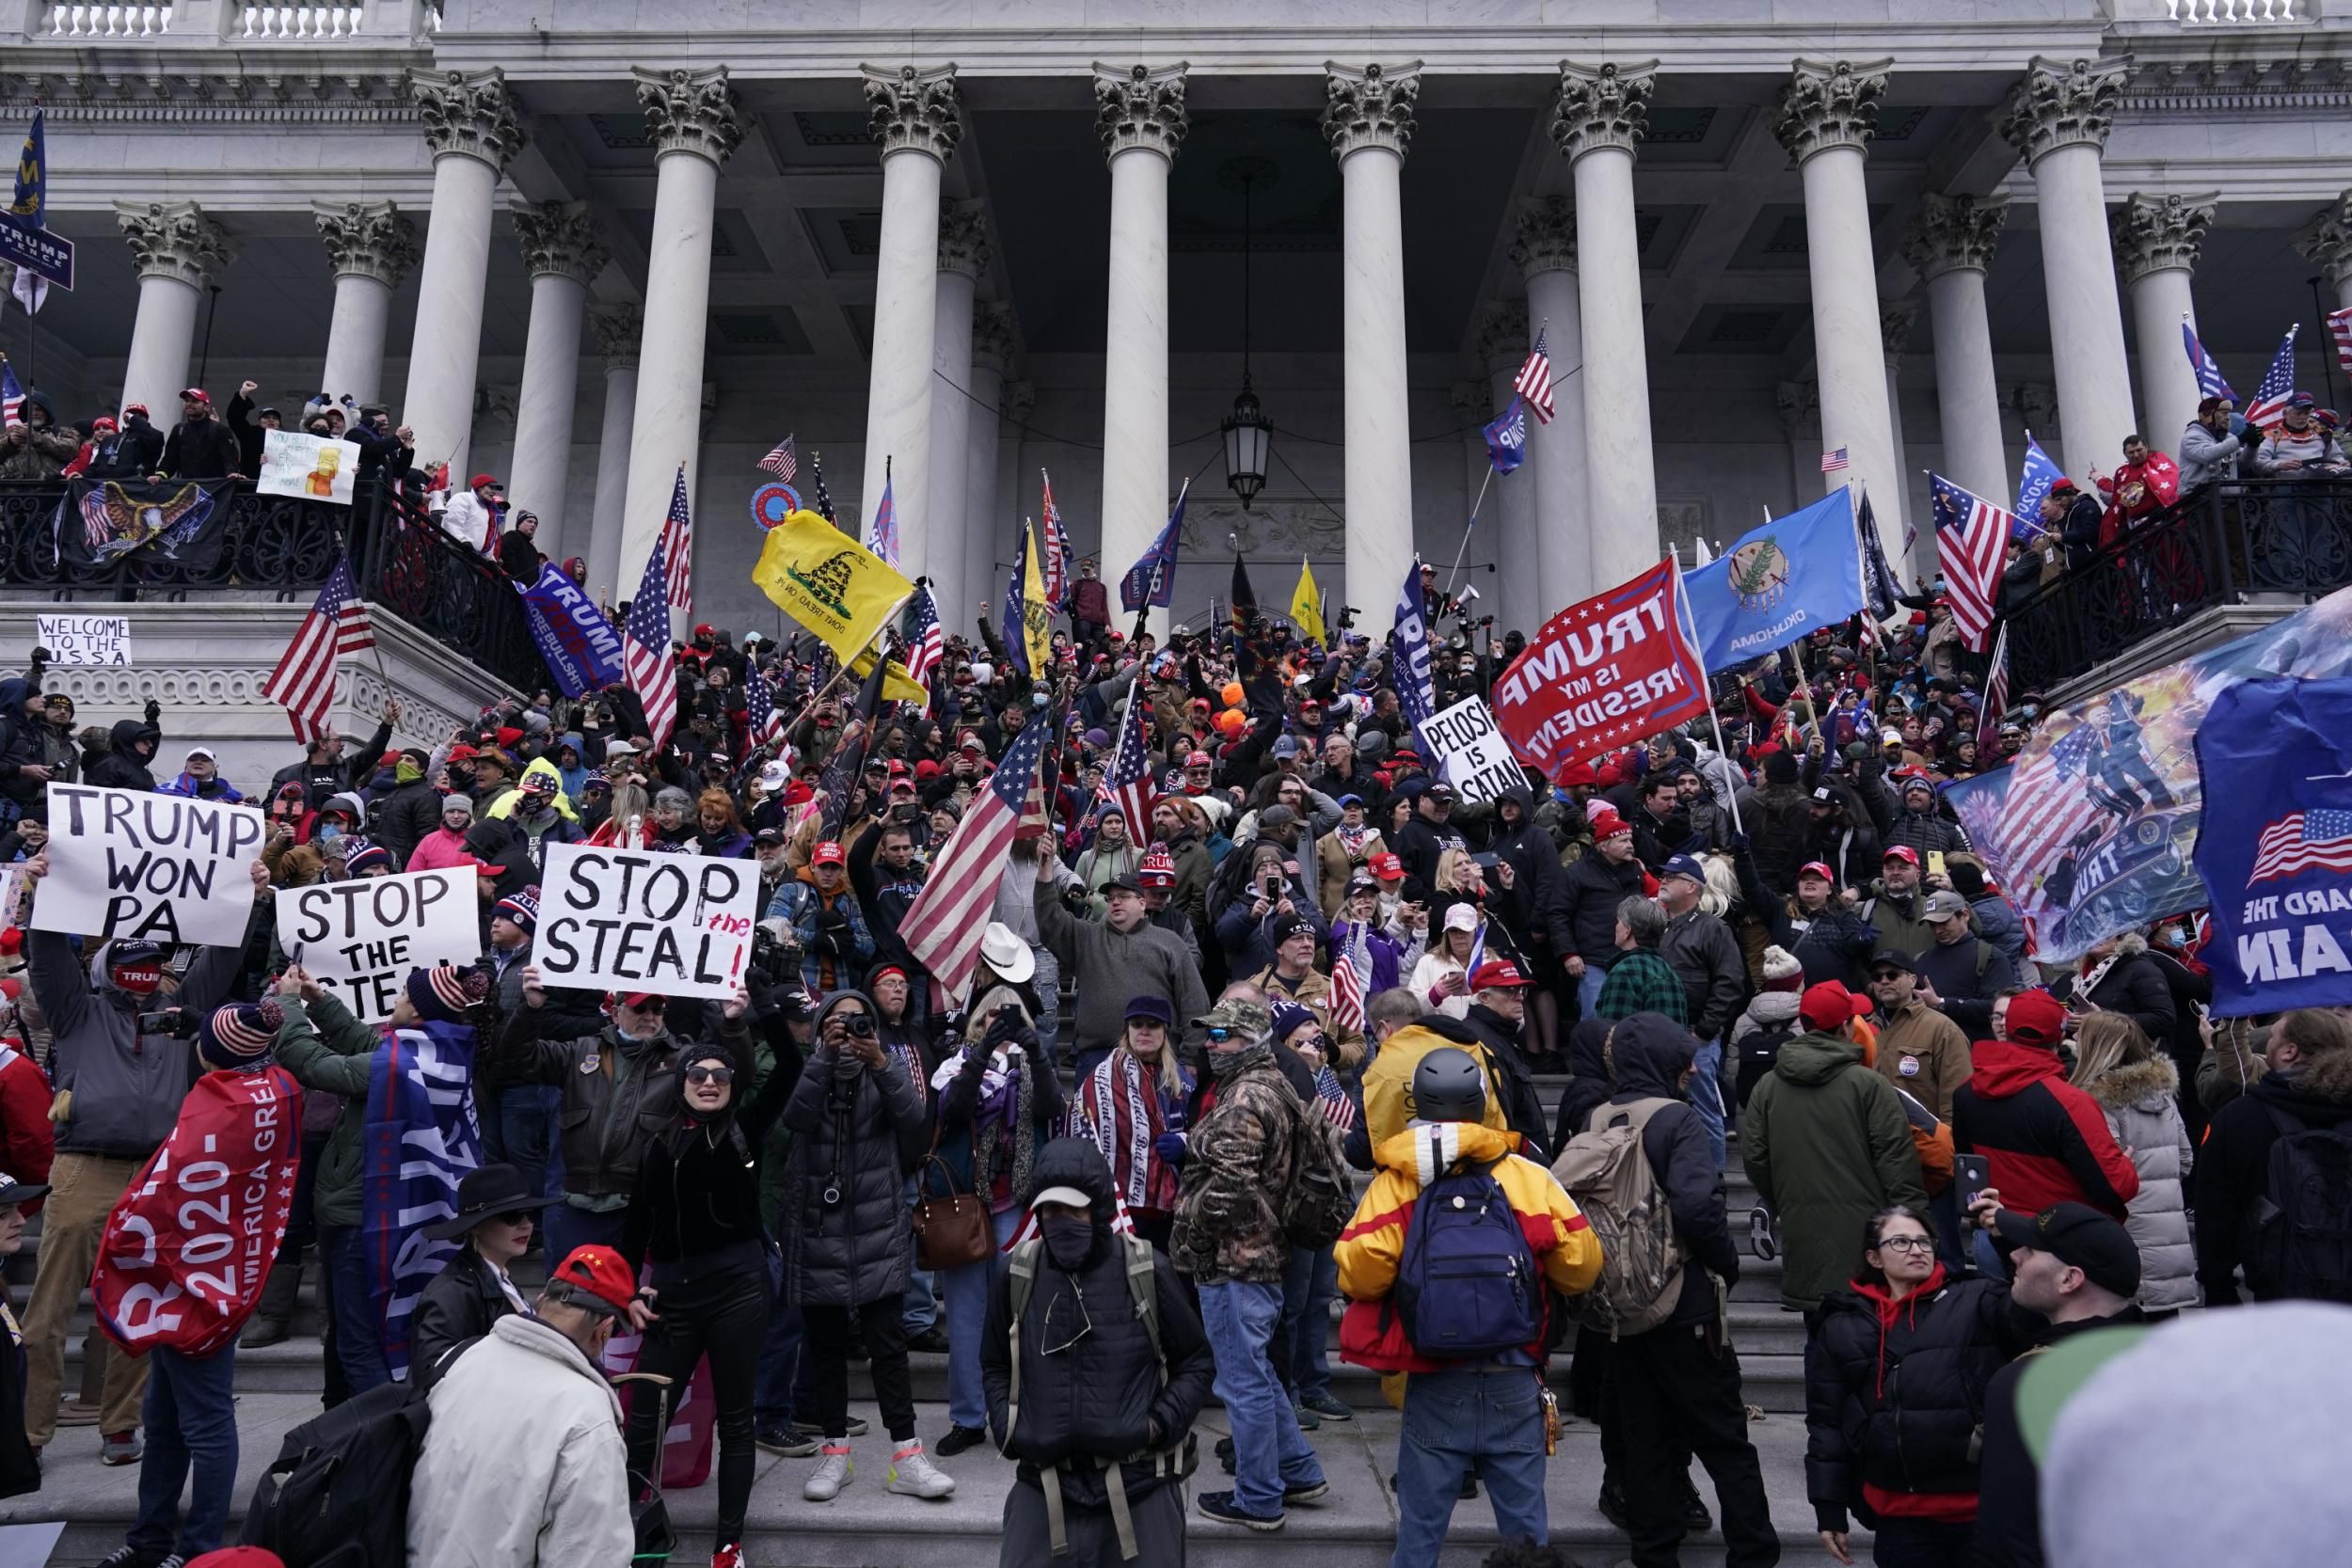 Right-wing insurrectionists, fueled by then-President Donald Trump's relentless lies about voter fraud, violently rioted at the U.S. Capitol in Washington, D.C., in an attempt to overturn the 2020 presidential election results before lawmakers finalized them in a joint session of the 117th Congress on January 6, 2021. (Photo: Kent Nishimura/Los Angeles Times via Getty Images)